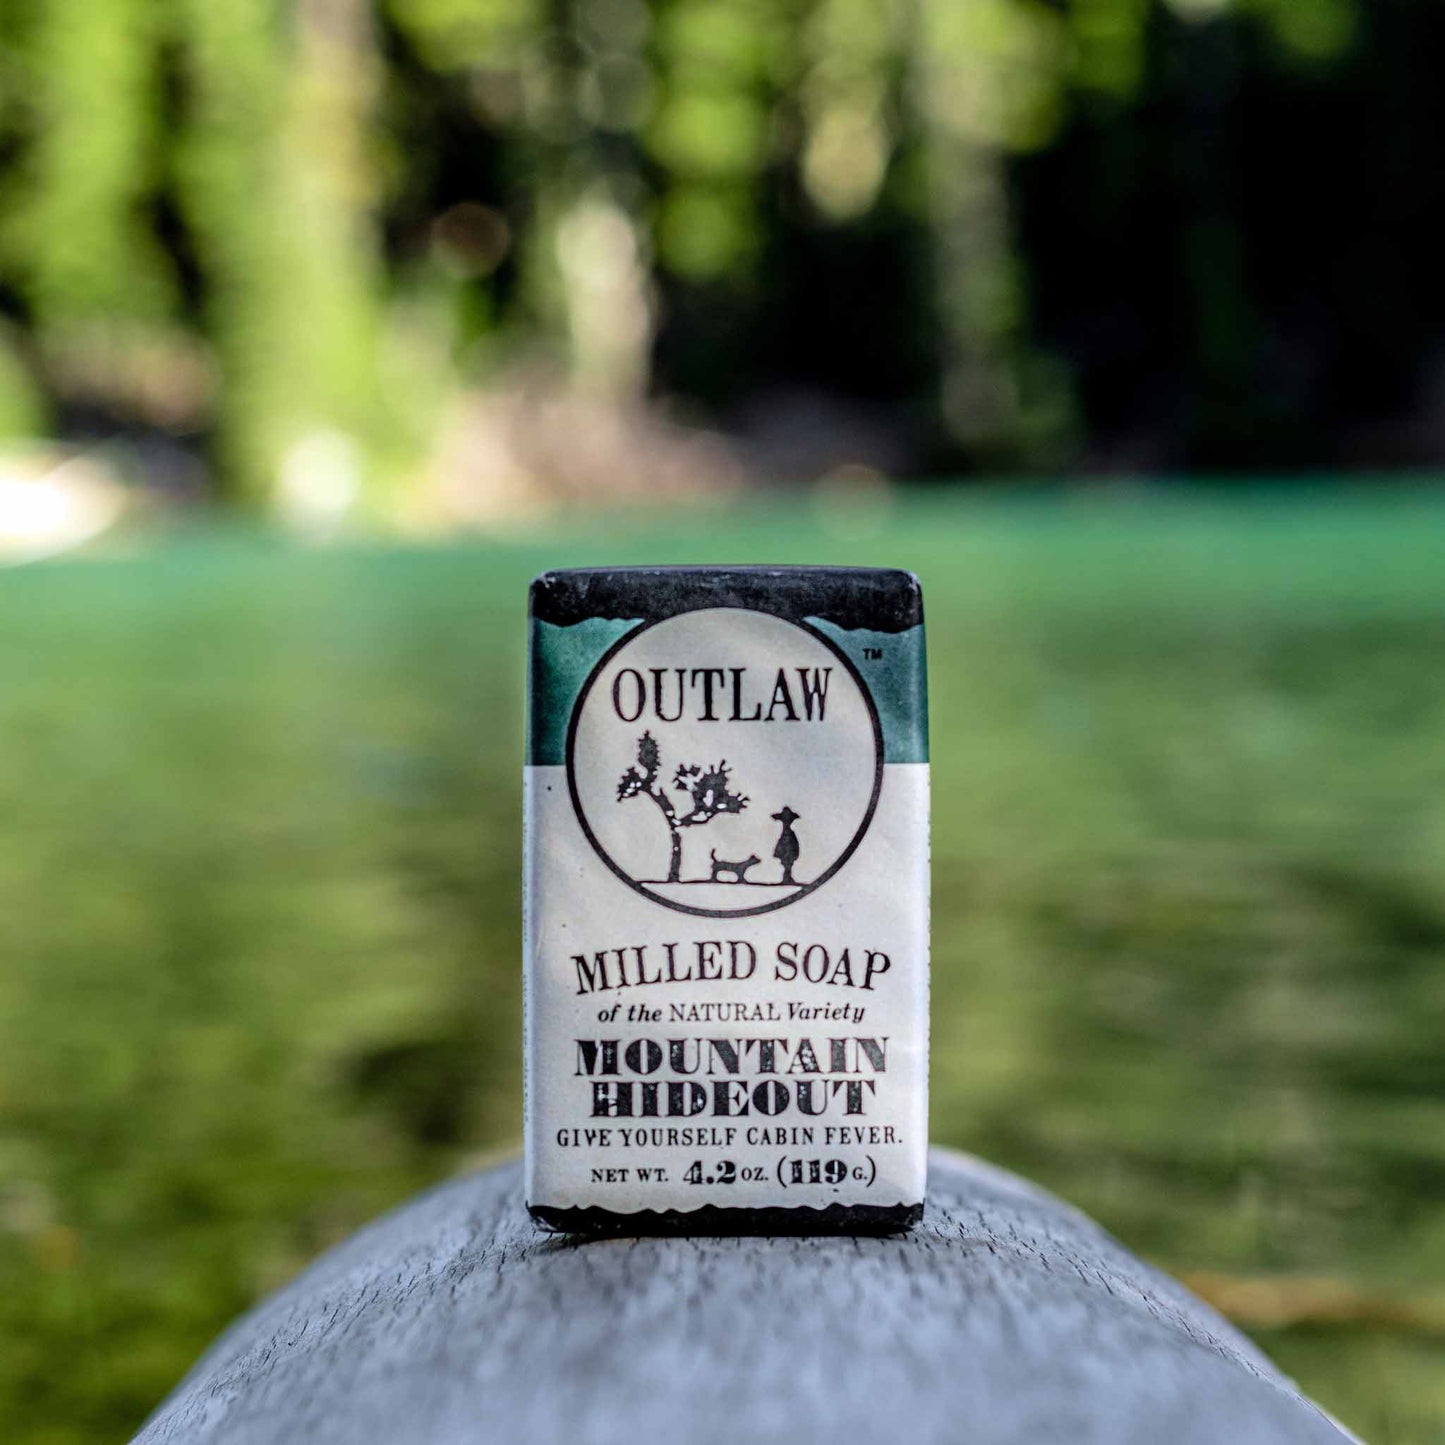 Mountain Hideout natural bar soap from Outlaw